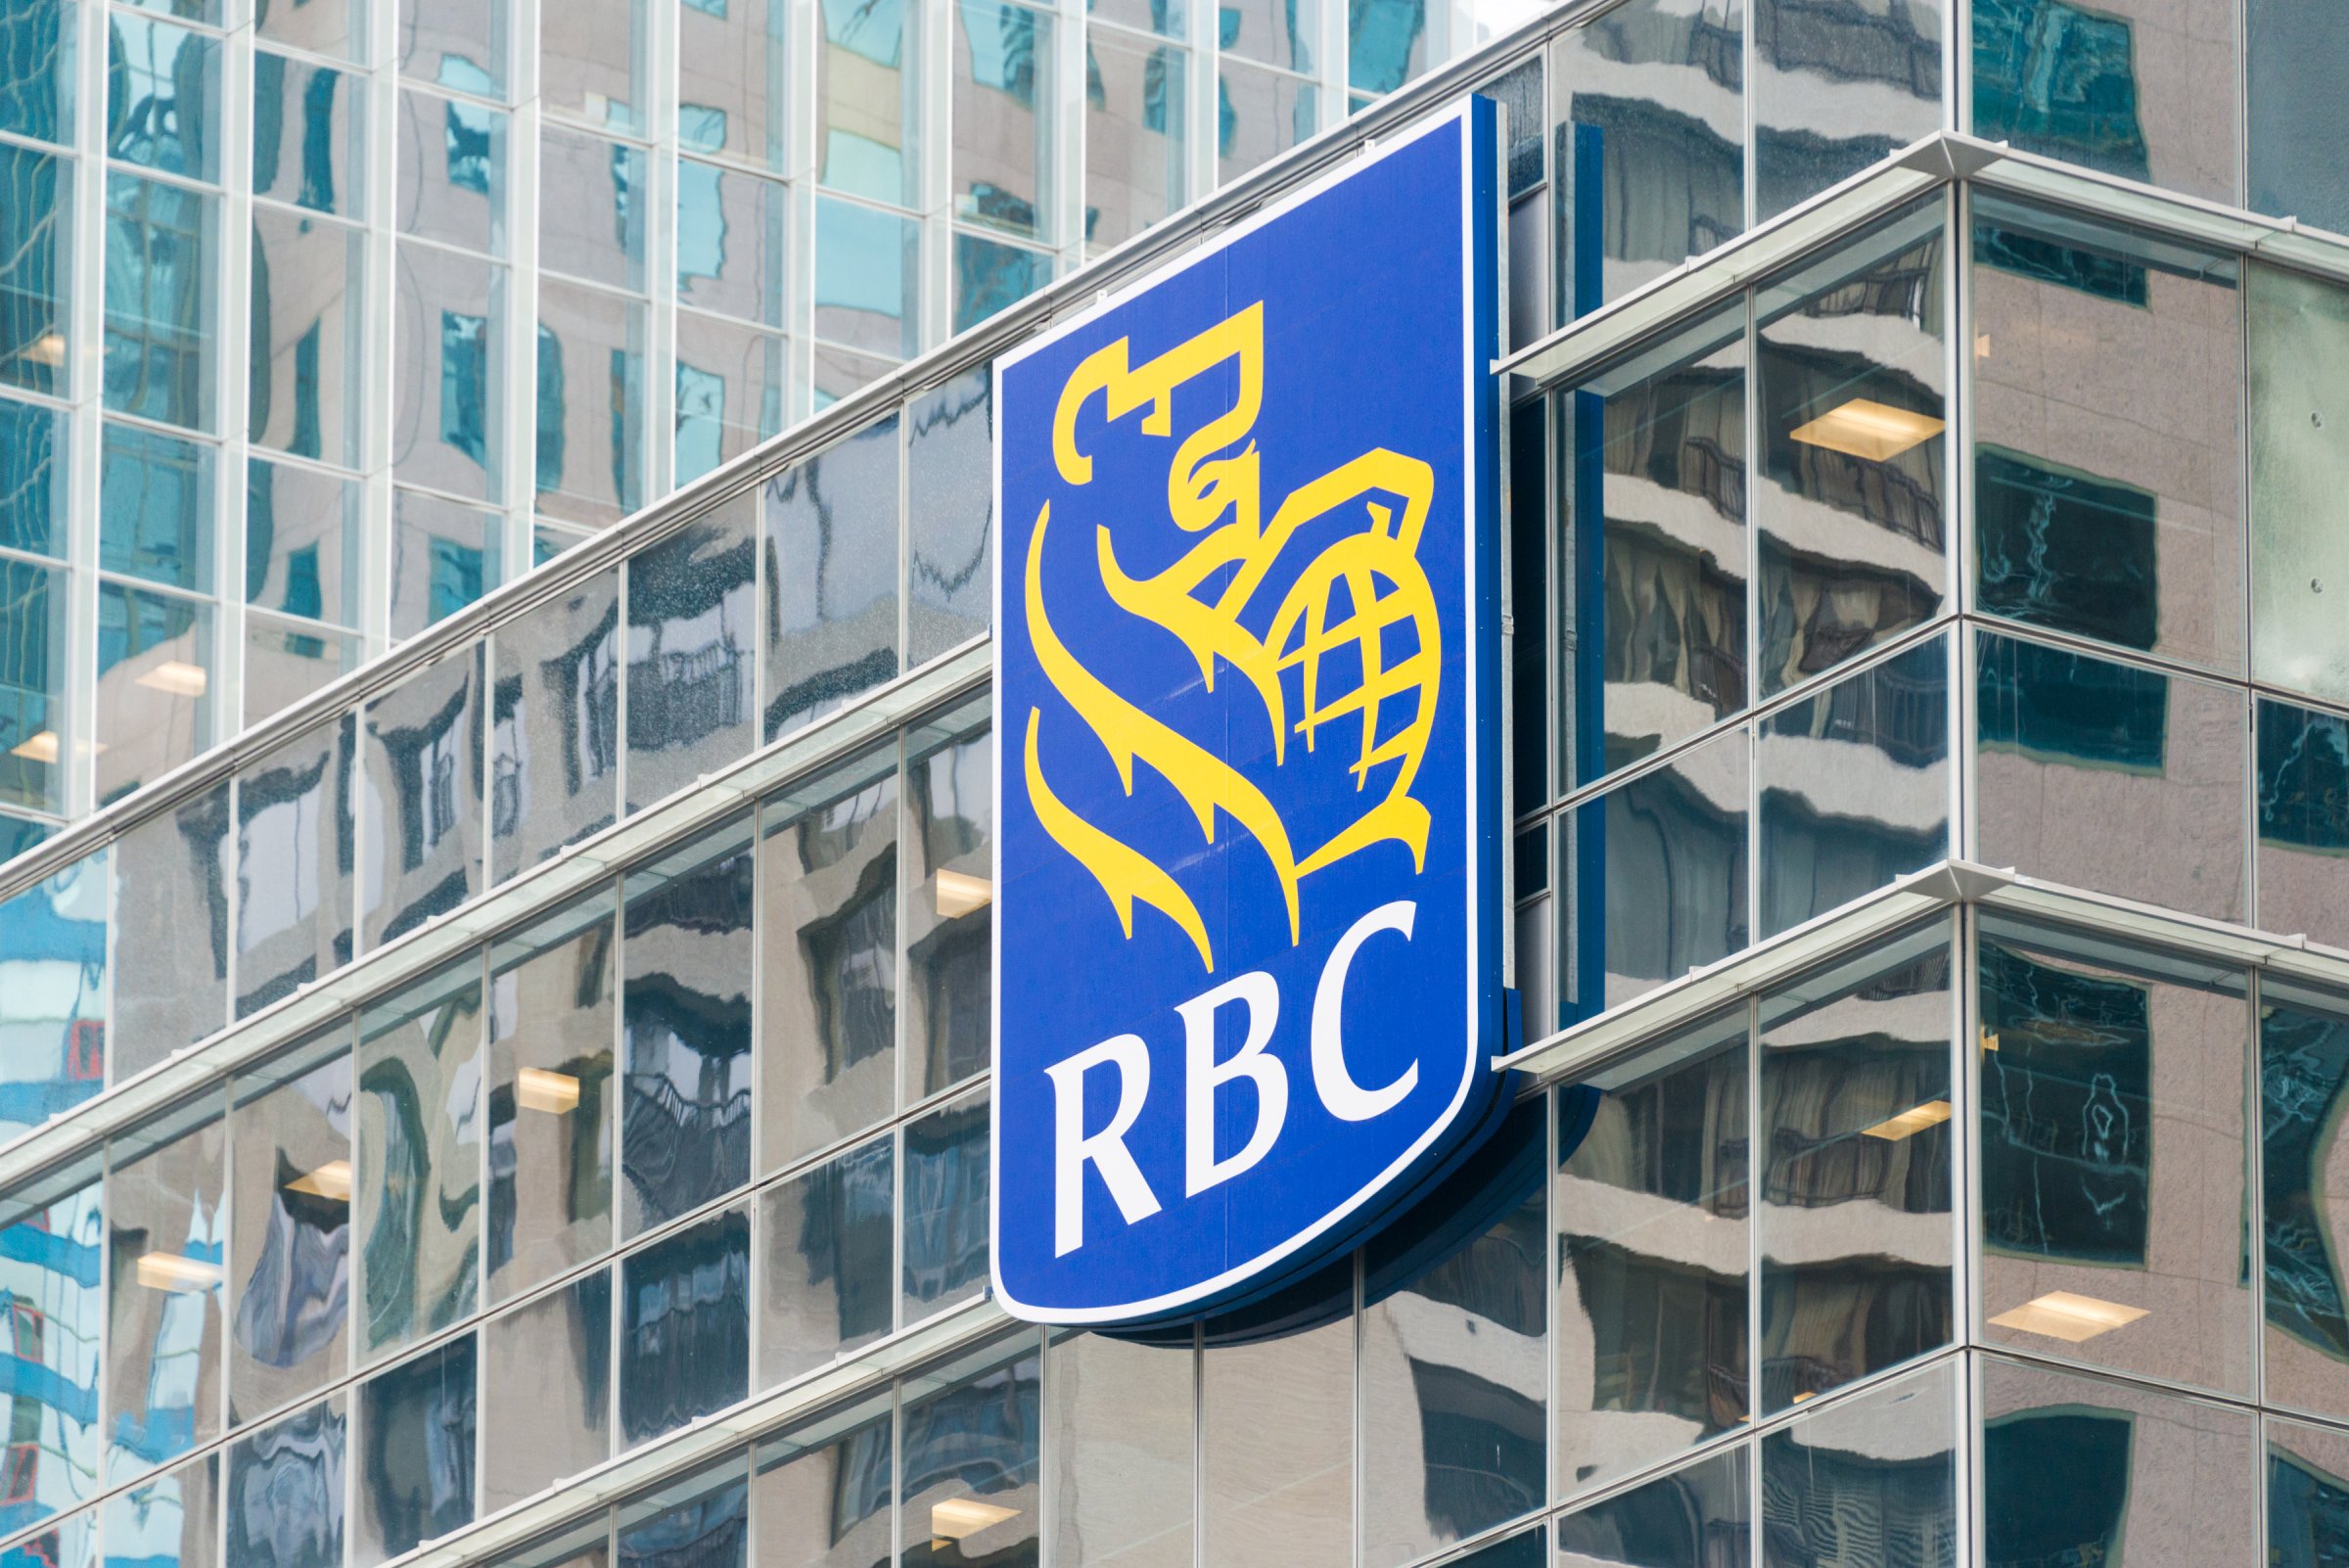 The symbol RBC on the glass facade of a building. The Royal